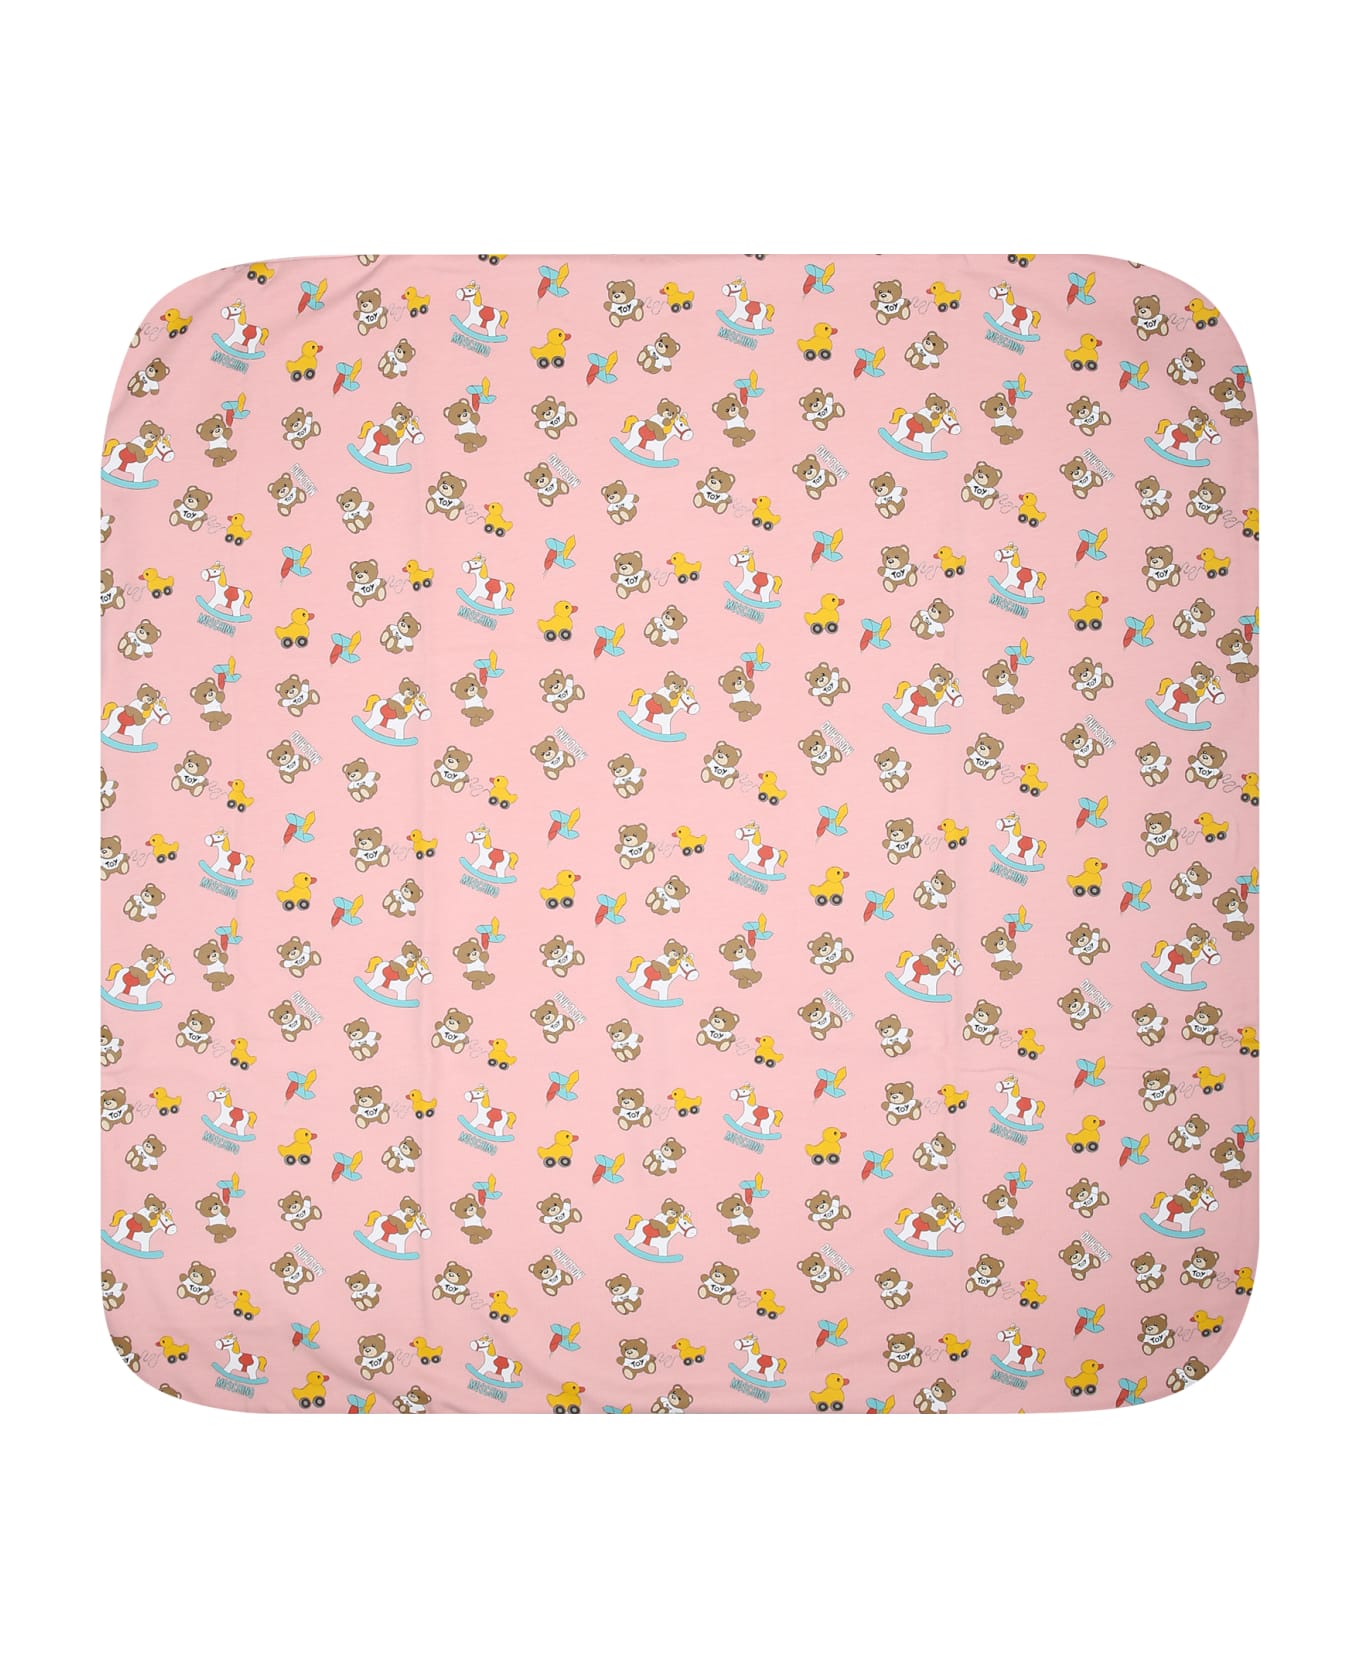 Moschino Pink Baby Girl Blanket With All-over Pattern - Pink